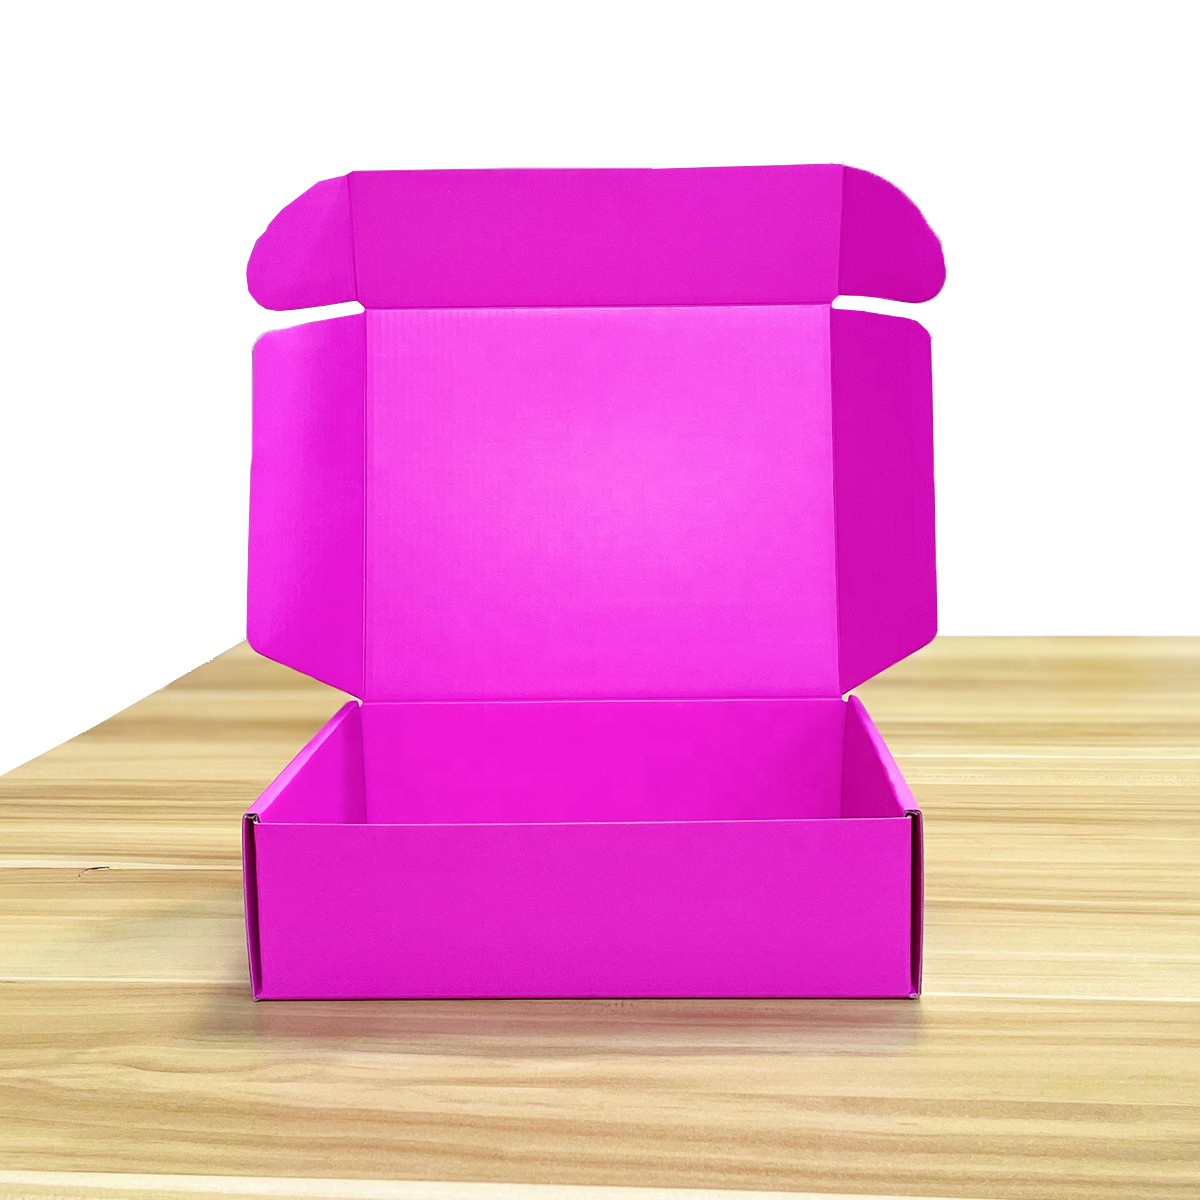 Packaging manufacturing custom packaging box gift box personalized boxes